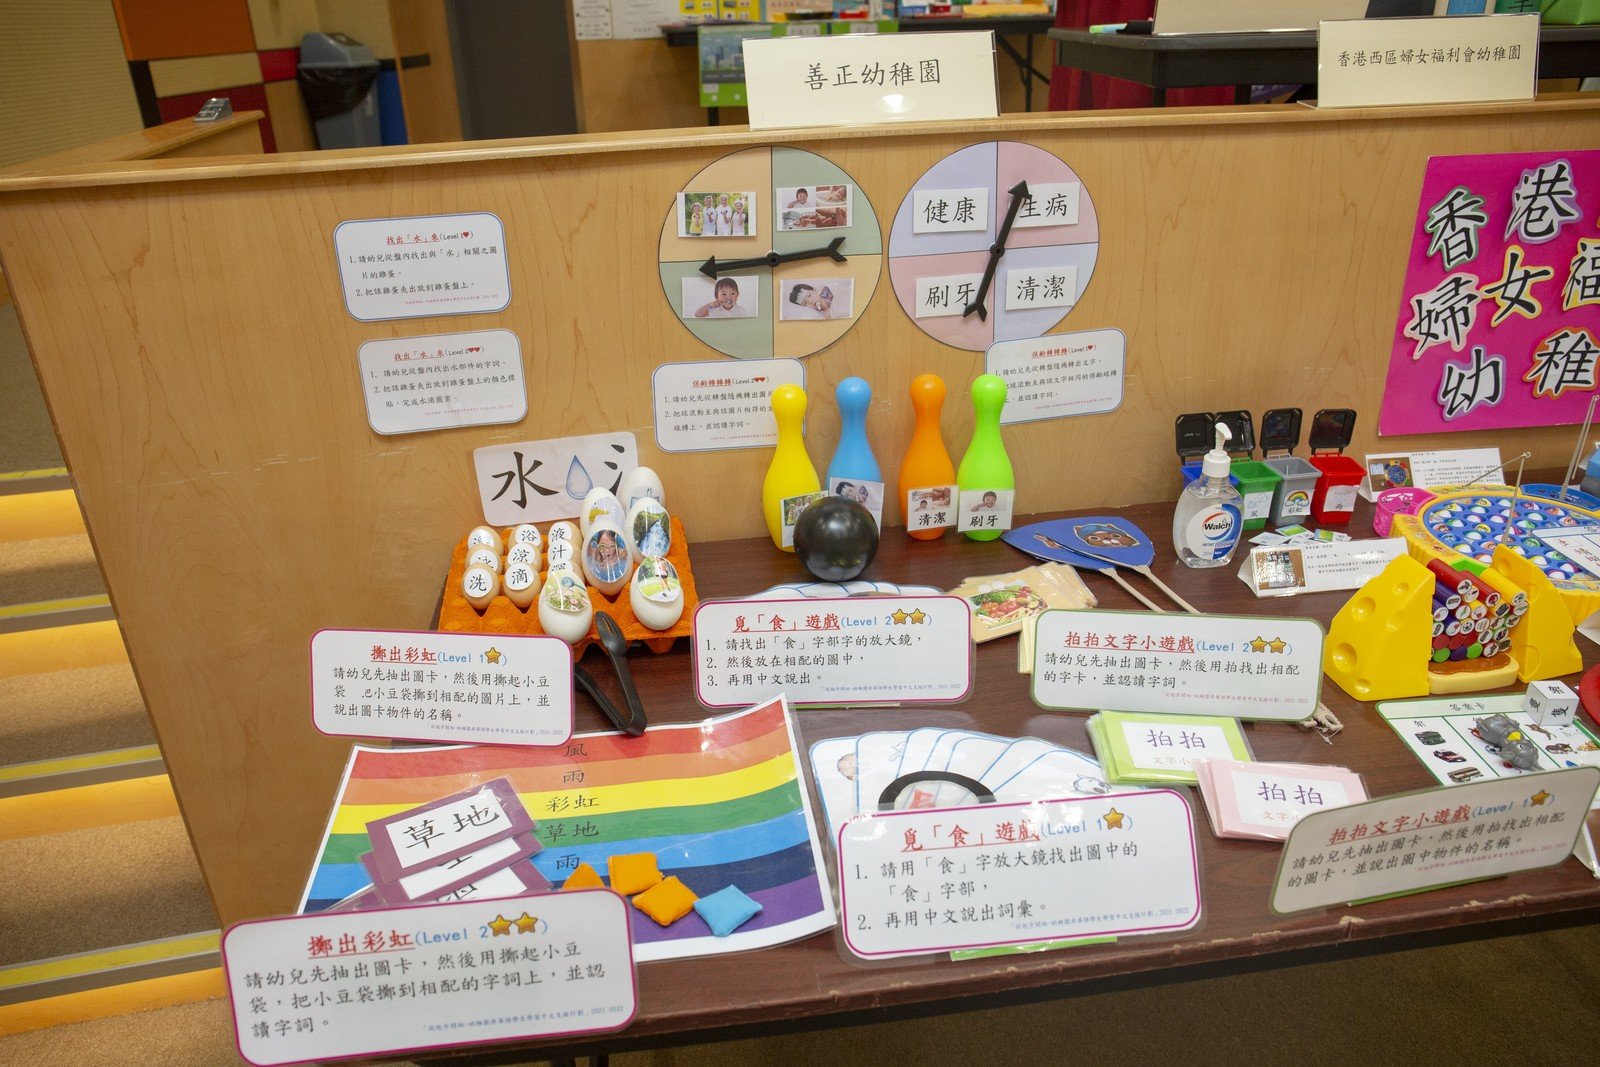 The participating kindergartens developed various teaching materials based on the skills and experiences shared by the project team. 